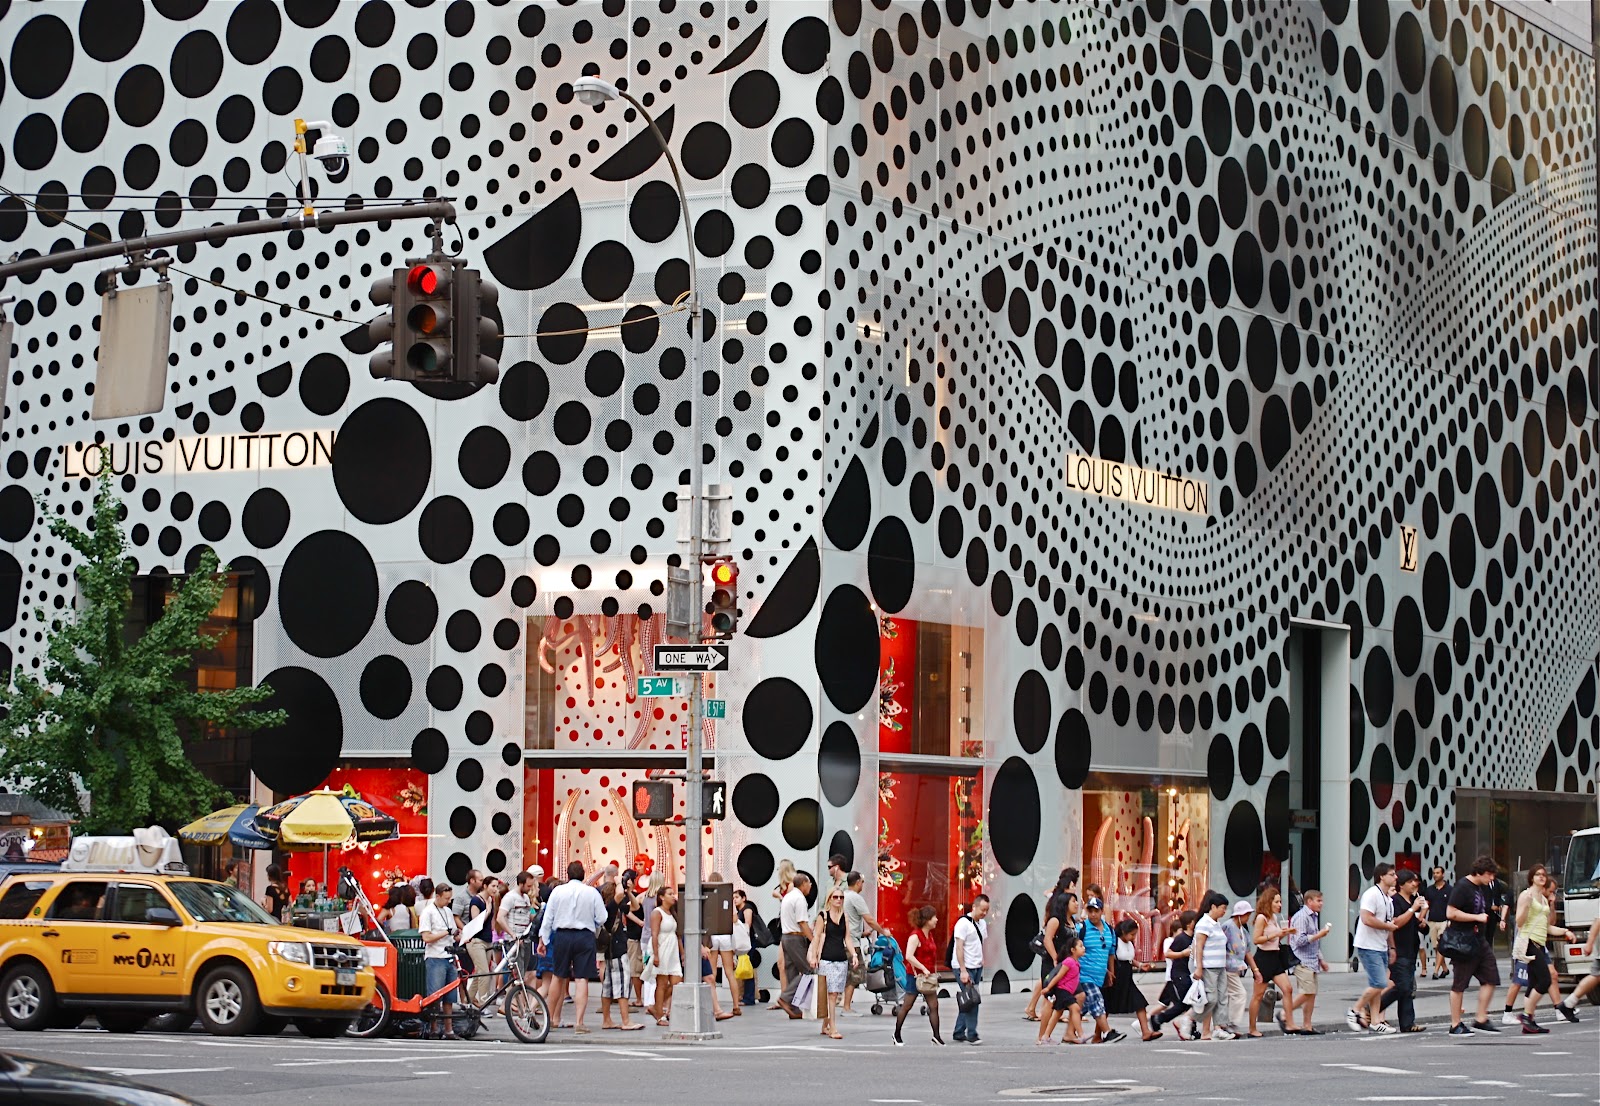 NYC ♥ NYC: Louis Vuitton Collaborates With Artist Kusama - Manhattan Store Facade and Window Displays On Avenue Go Polka Dots